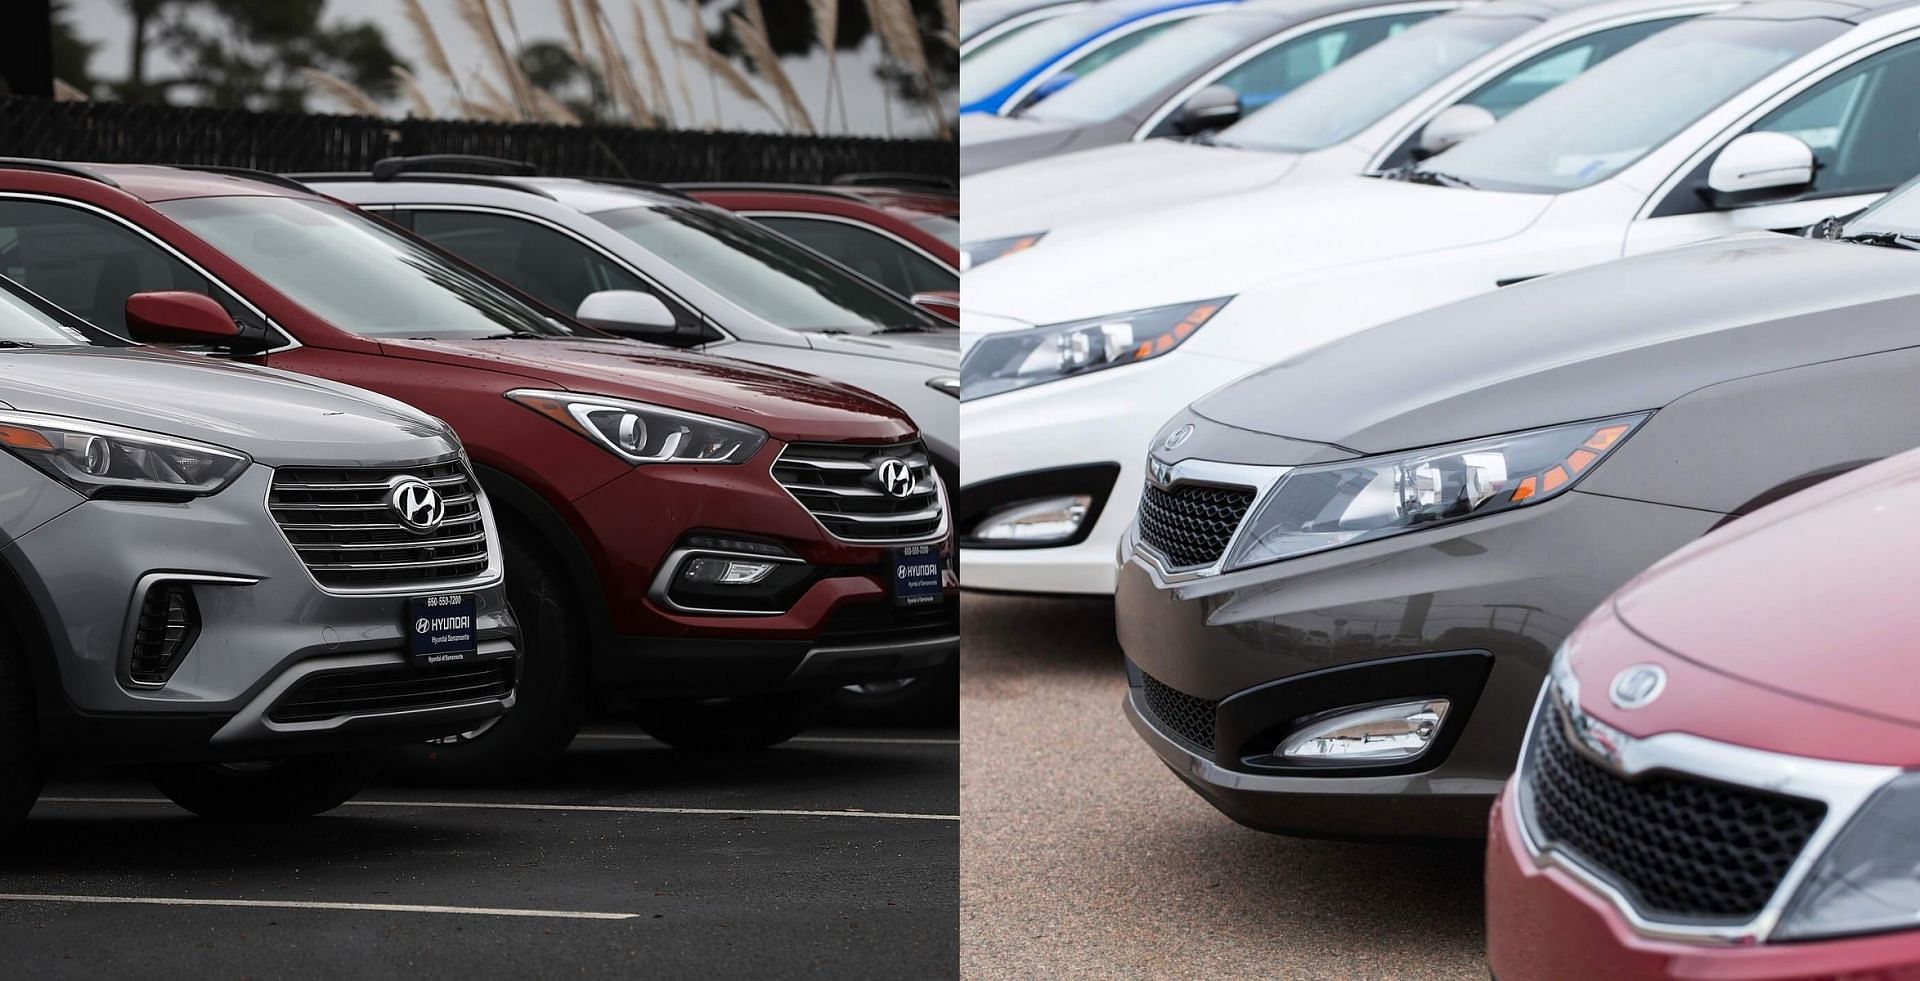 Korean automakers recall around 350,000 cars in the US (Image via Justin Sullivan/Getty Images and Tomeng/Getty Images)